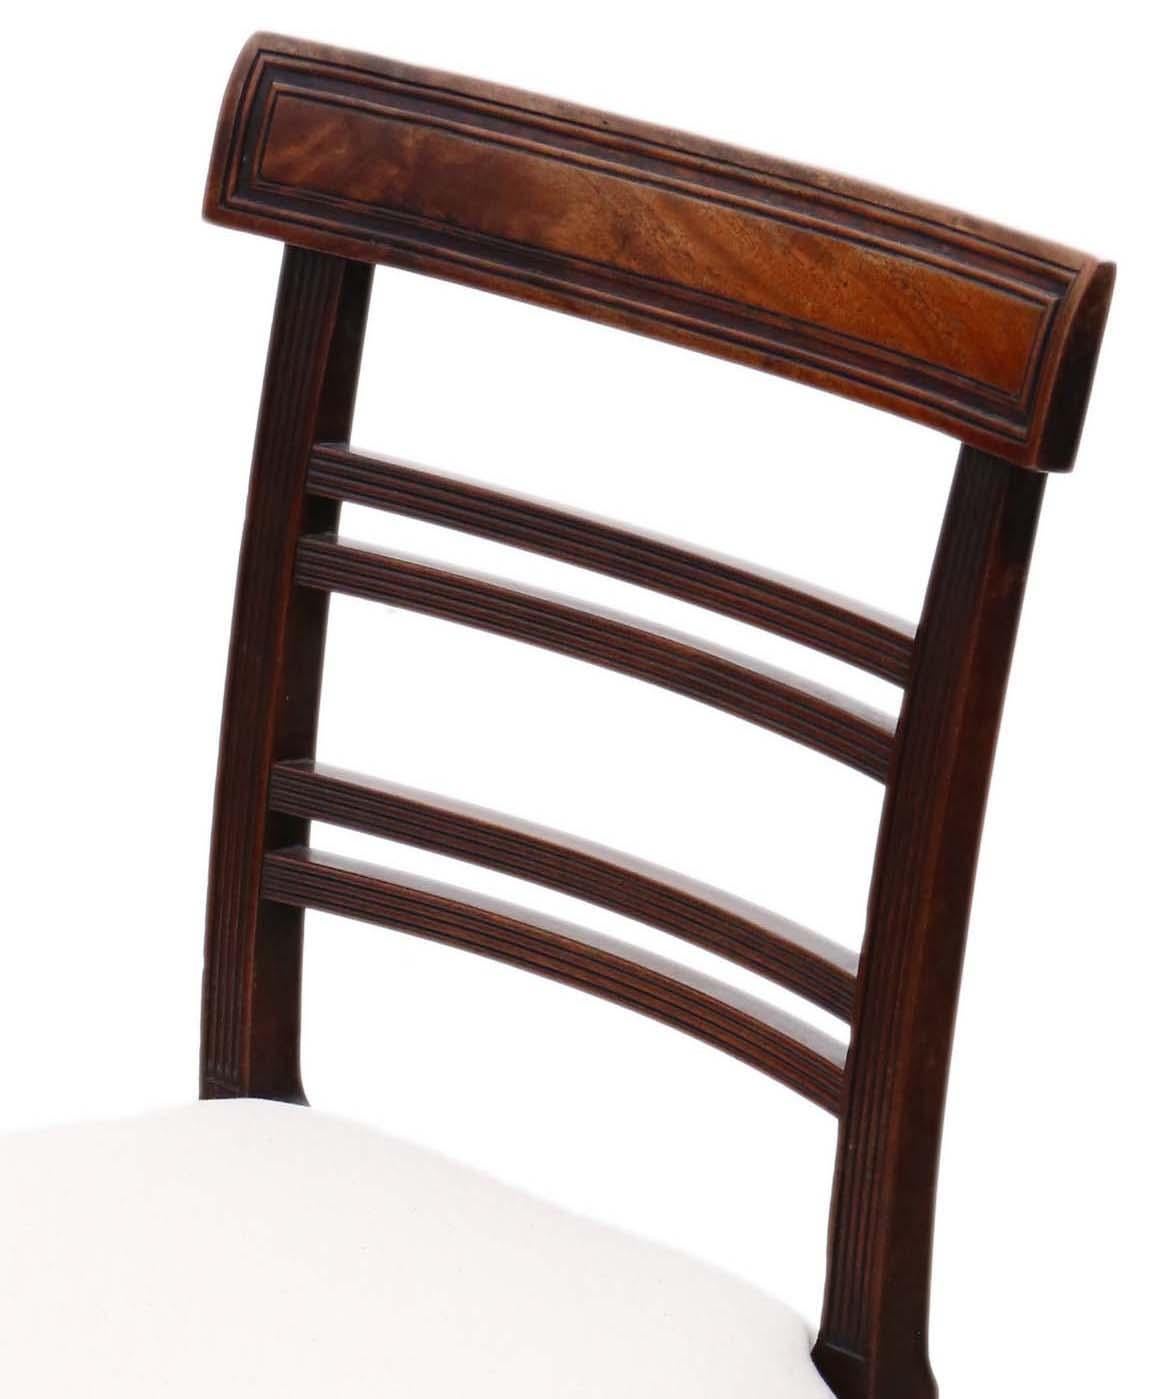 Early 19th Century Mahogany Dining Chairs: Set of 8 (6+2) Antique Quality, C1810 For Sale 4